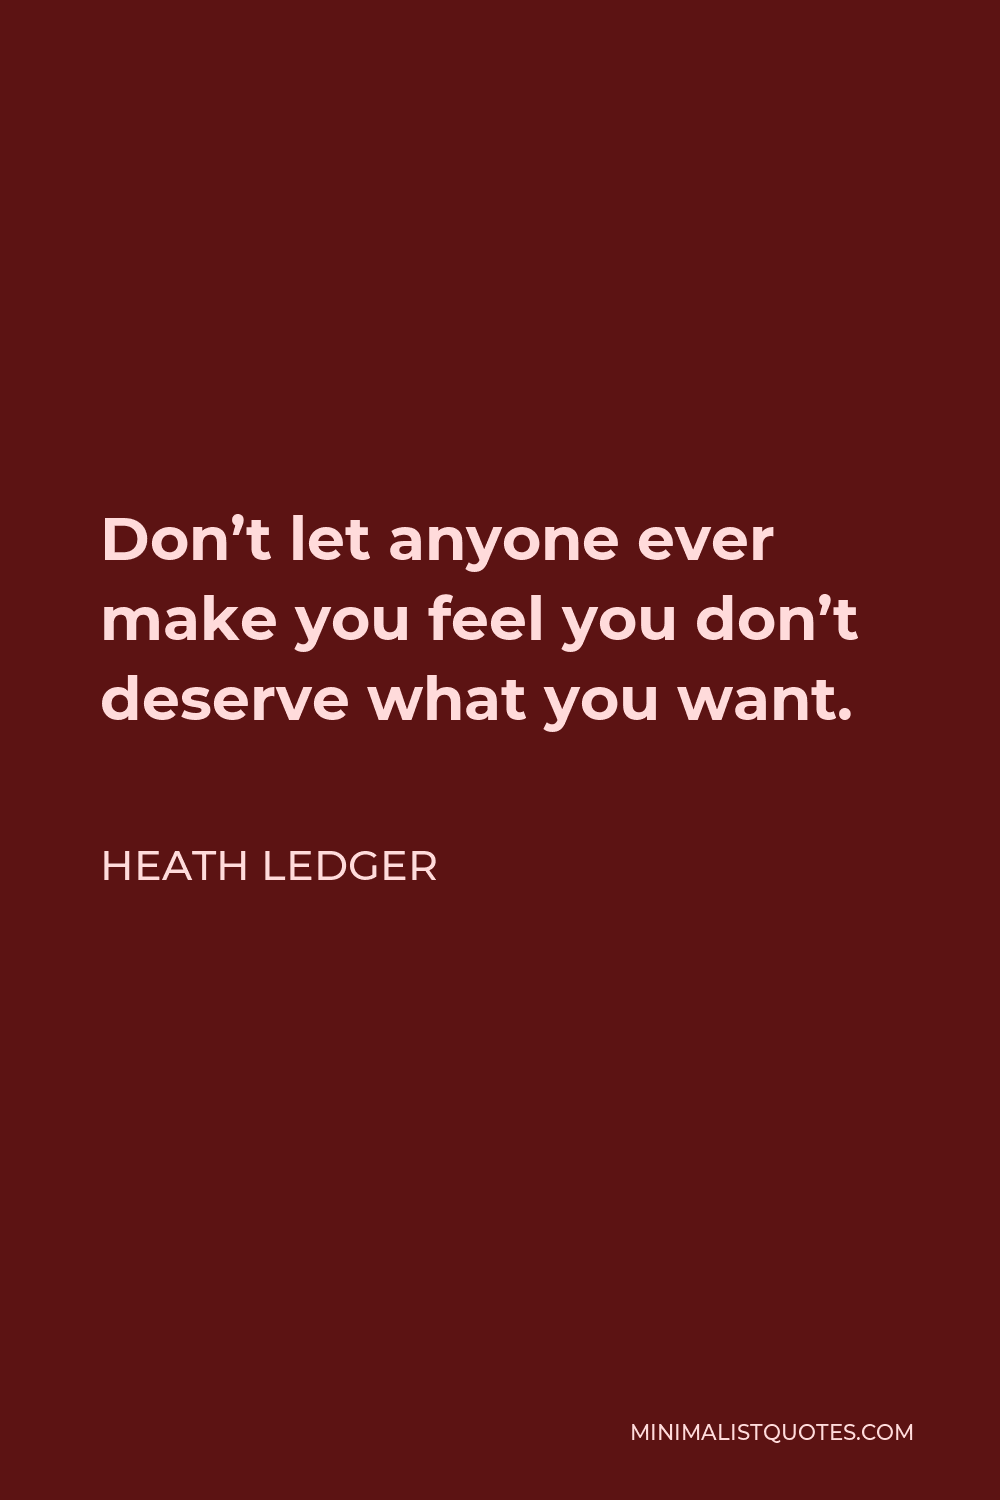 Heath Ledger Quote - Don’t let anyone ever make you feel you don’t deserve what you want.